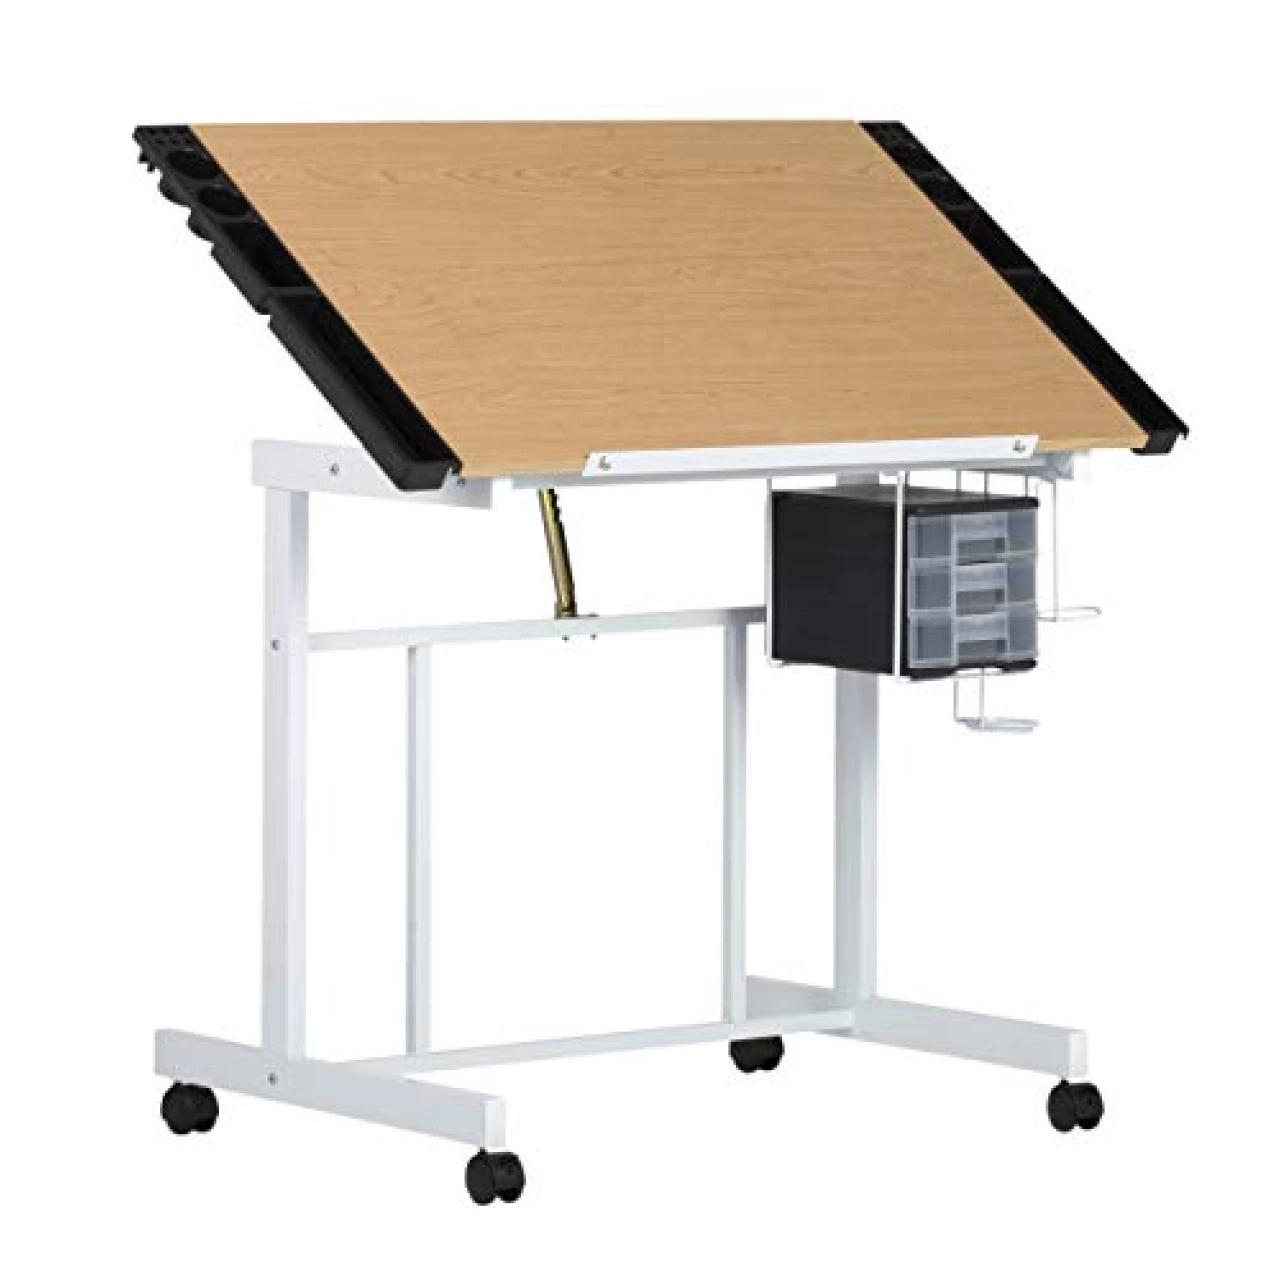 Studio Designs Deluxe Craft Station, Top Adjustable Drafting Table Craft Table Drawing Desk Hobby Table Writing Desk Studio Desk with Drawers, 36&rsquo;&lsquo;W x 24&rsquo;&lsquo;D, White / Maple